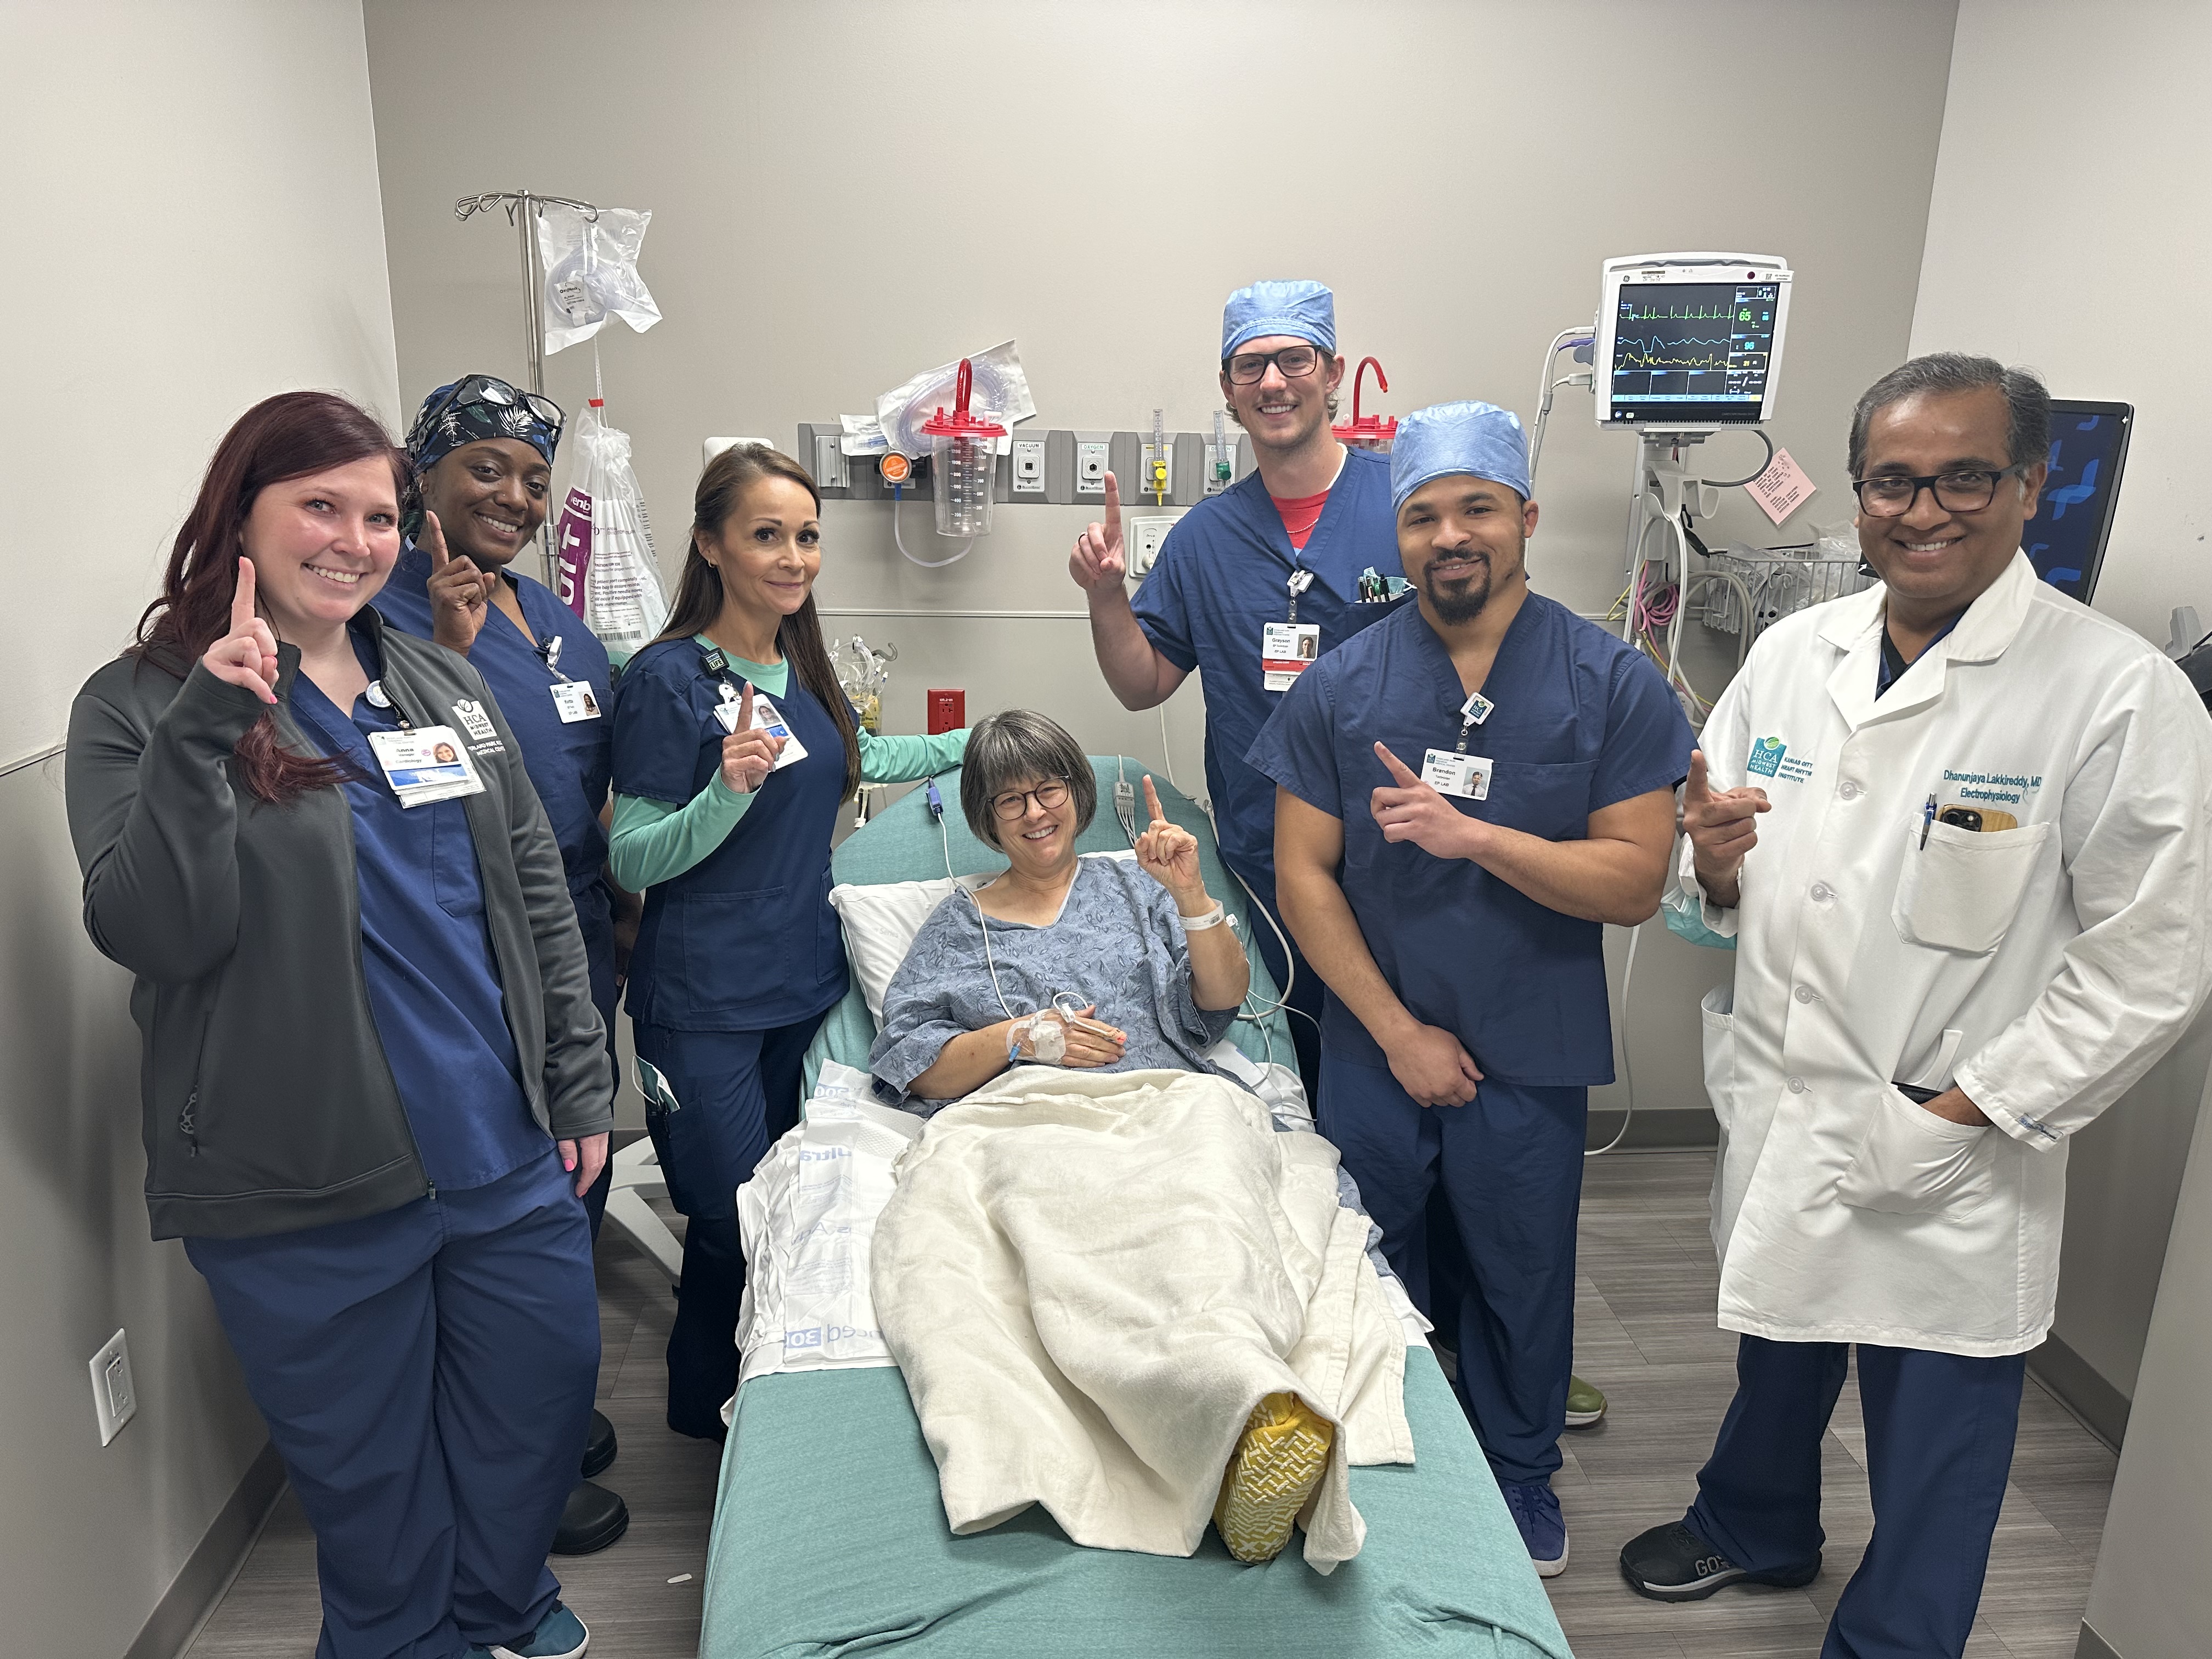 Dr. Lakkireddy and nurses stand beside patient Kristine Benson's bed, each holding up their index fingers in recognition of this first-time procedure.